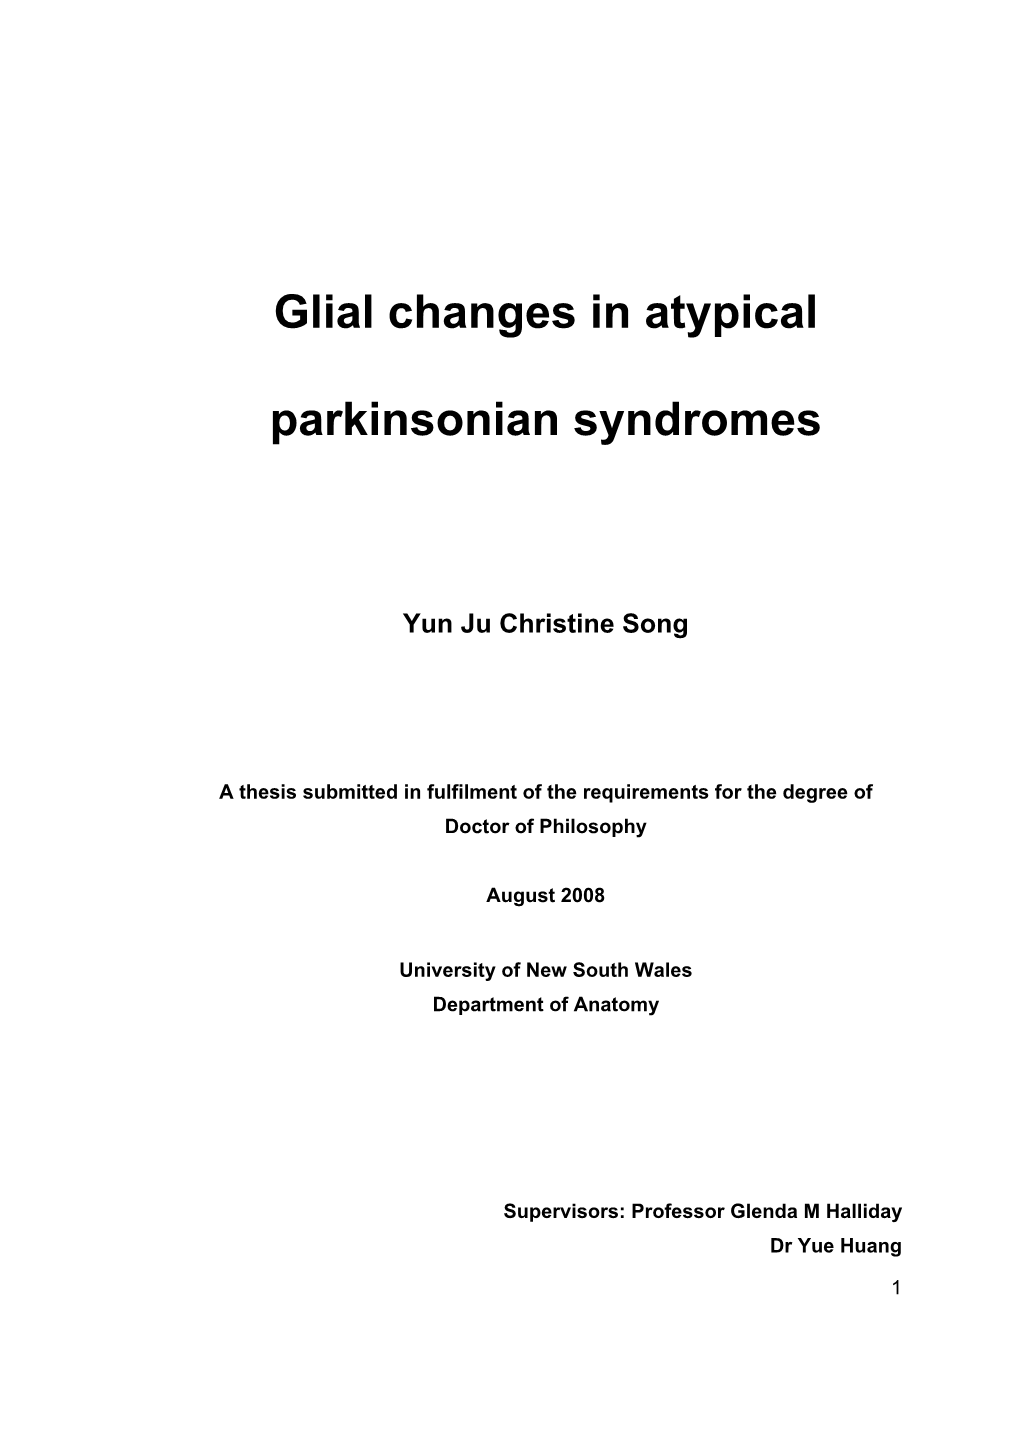 Glial Changes in Atypical Parkinsonian Syndromes